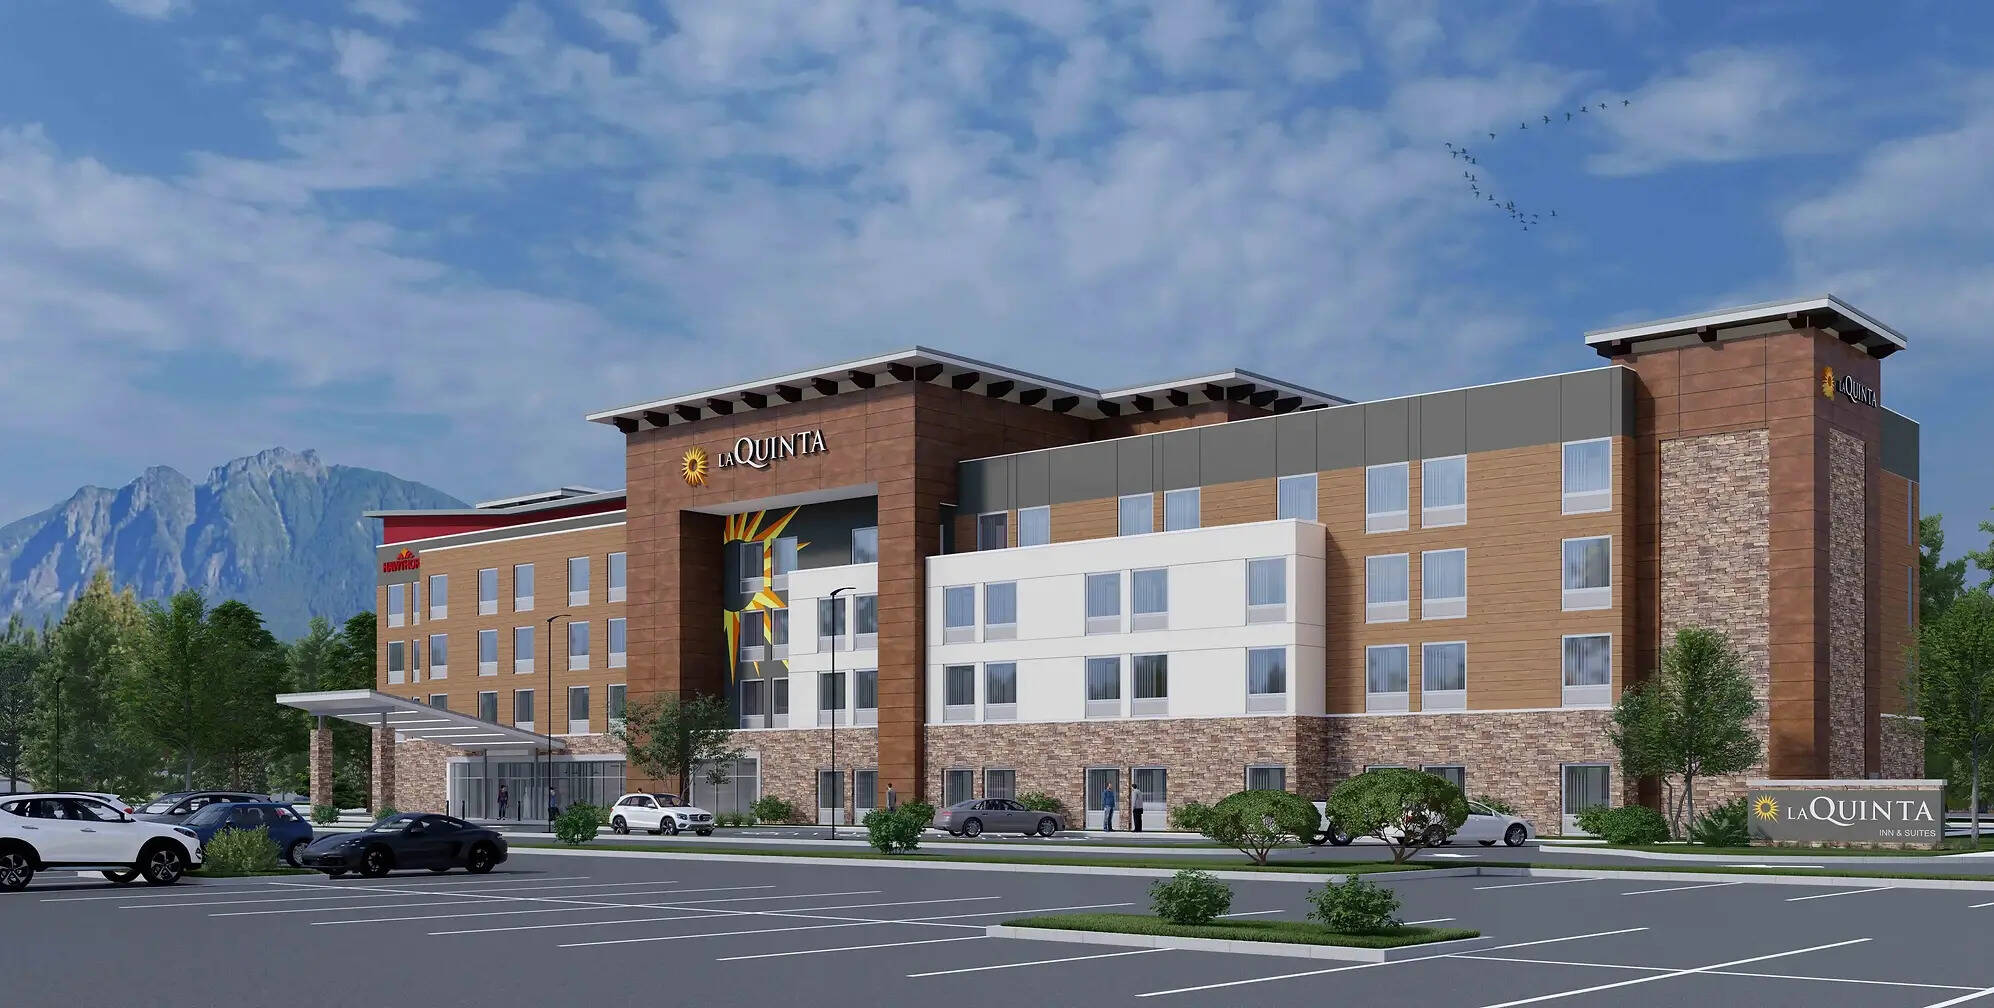 A mock-up of the future North Bend Outlet LaQuinta/Wyndham hotel. Photo courtesy of Seaver Franks Architects Inc.